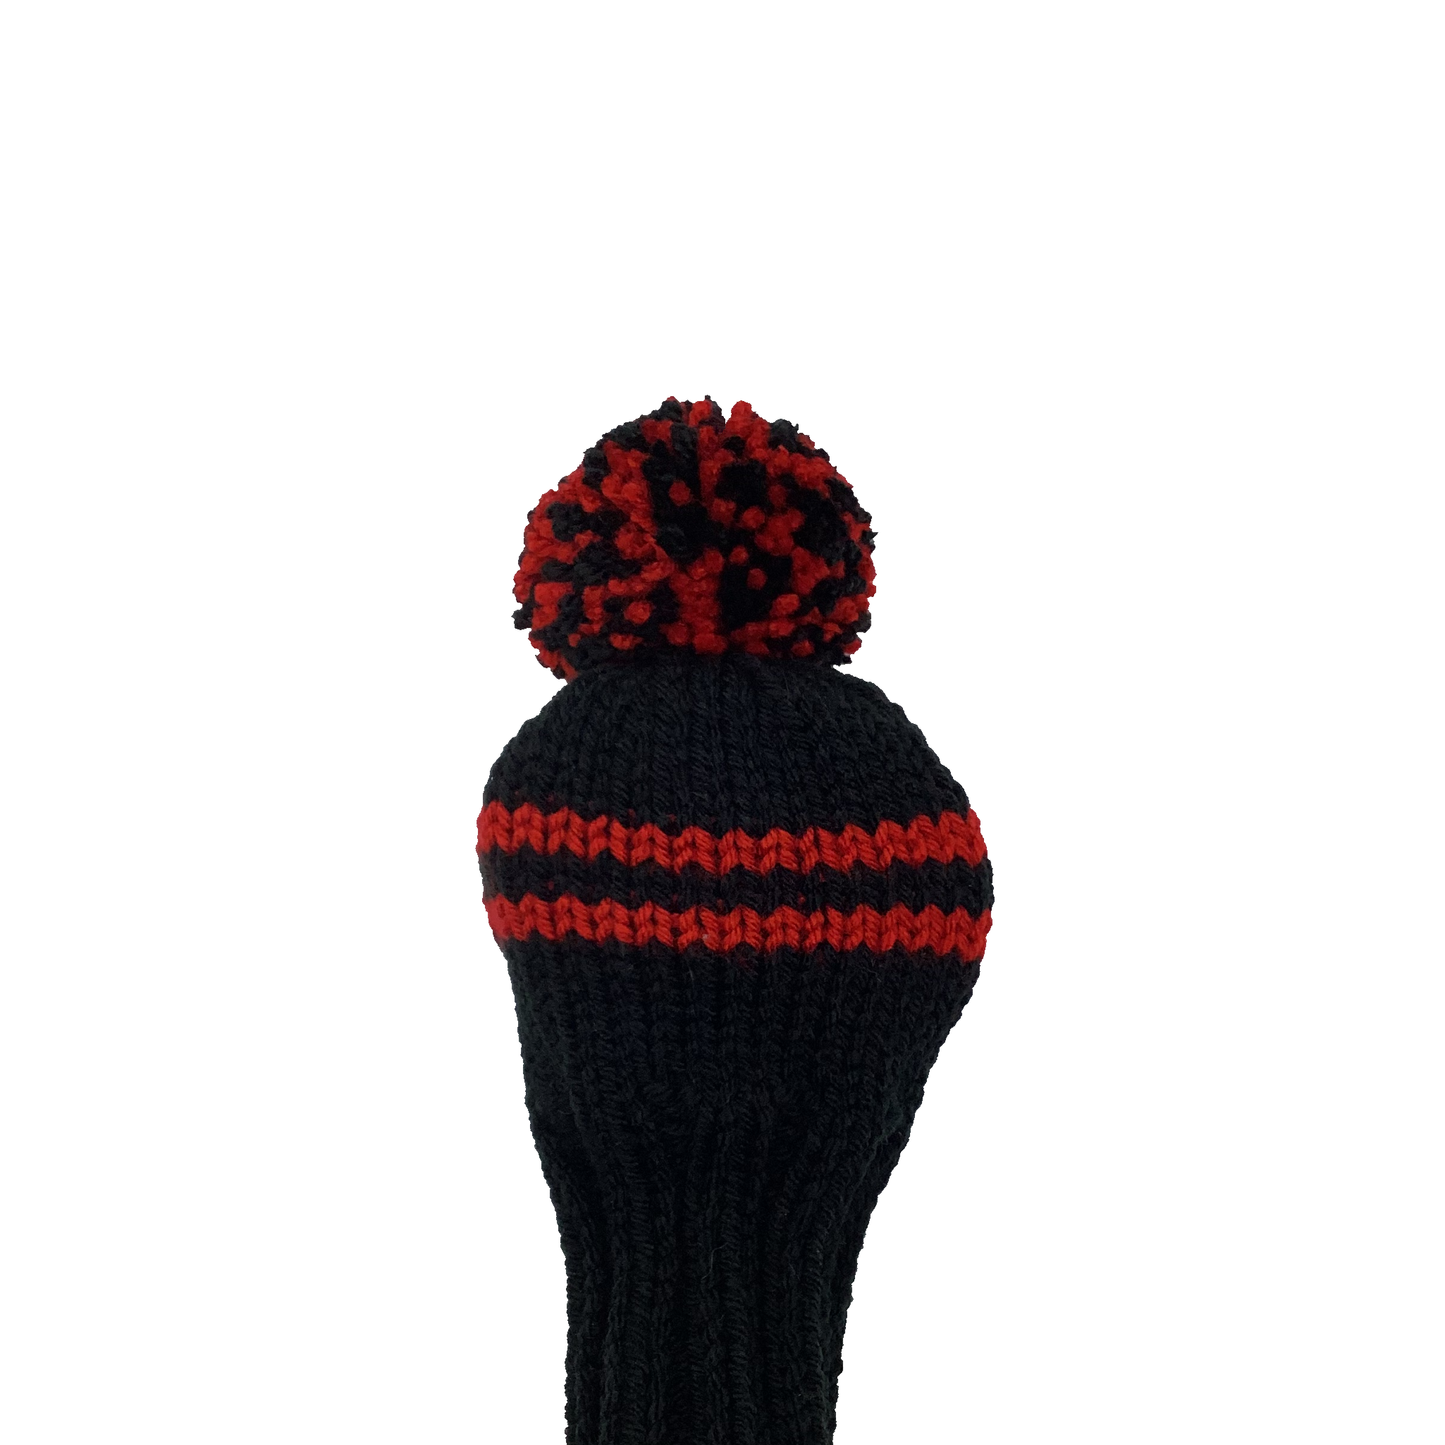 Black and Red - Fairway Wood #2 Headcover